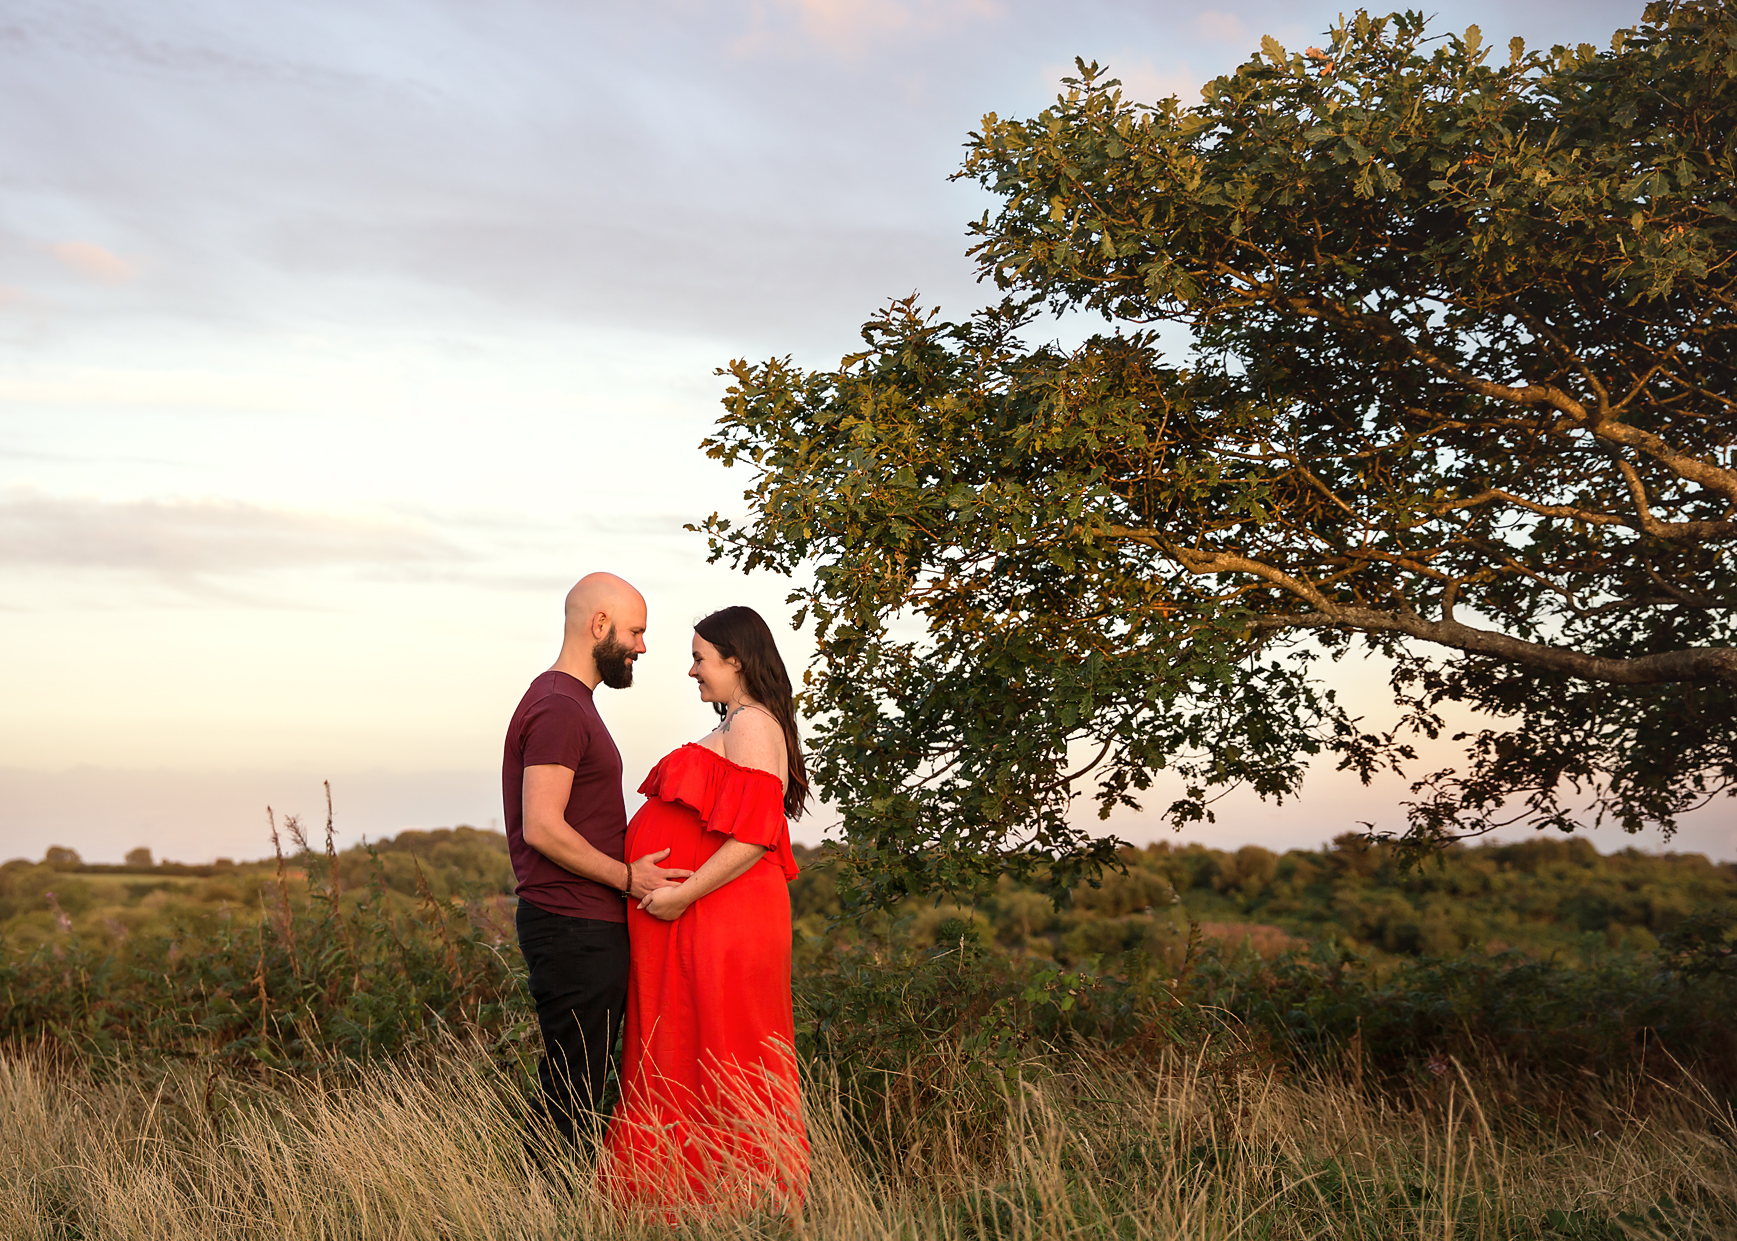 maternity bump photographer south wales cardiff 